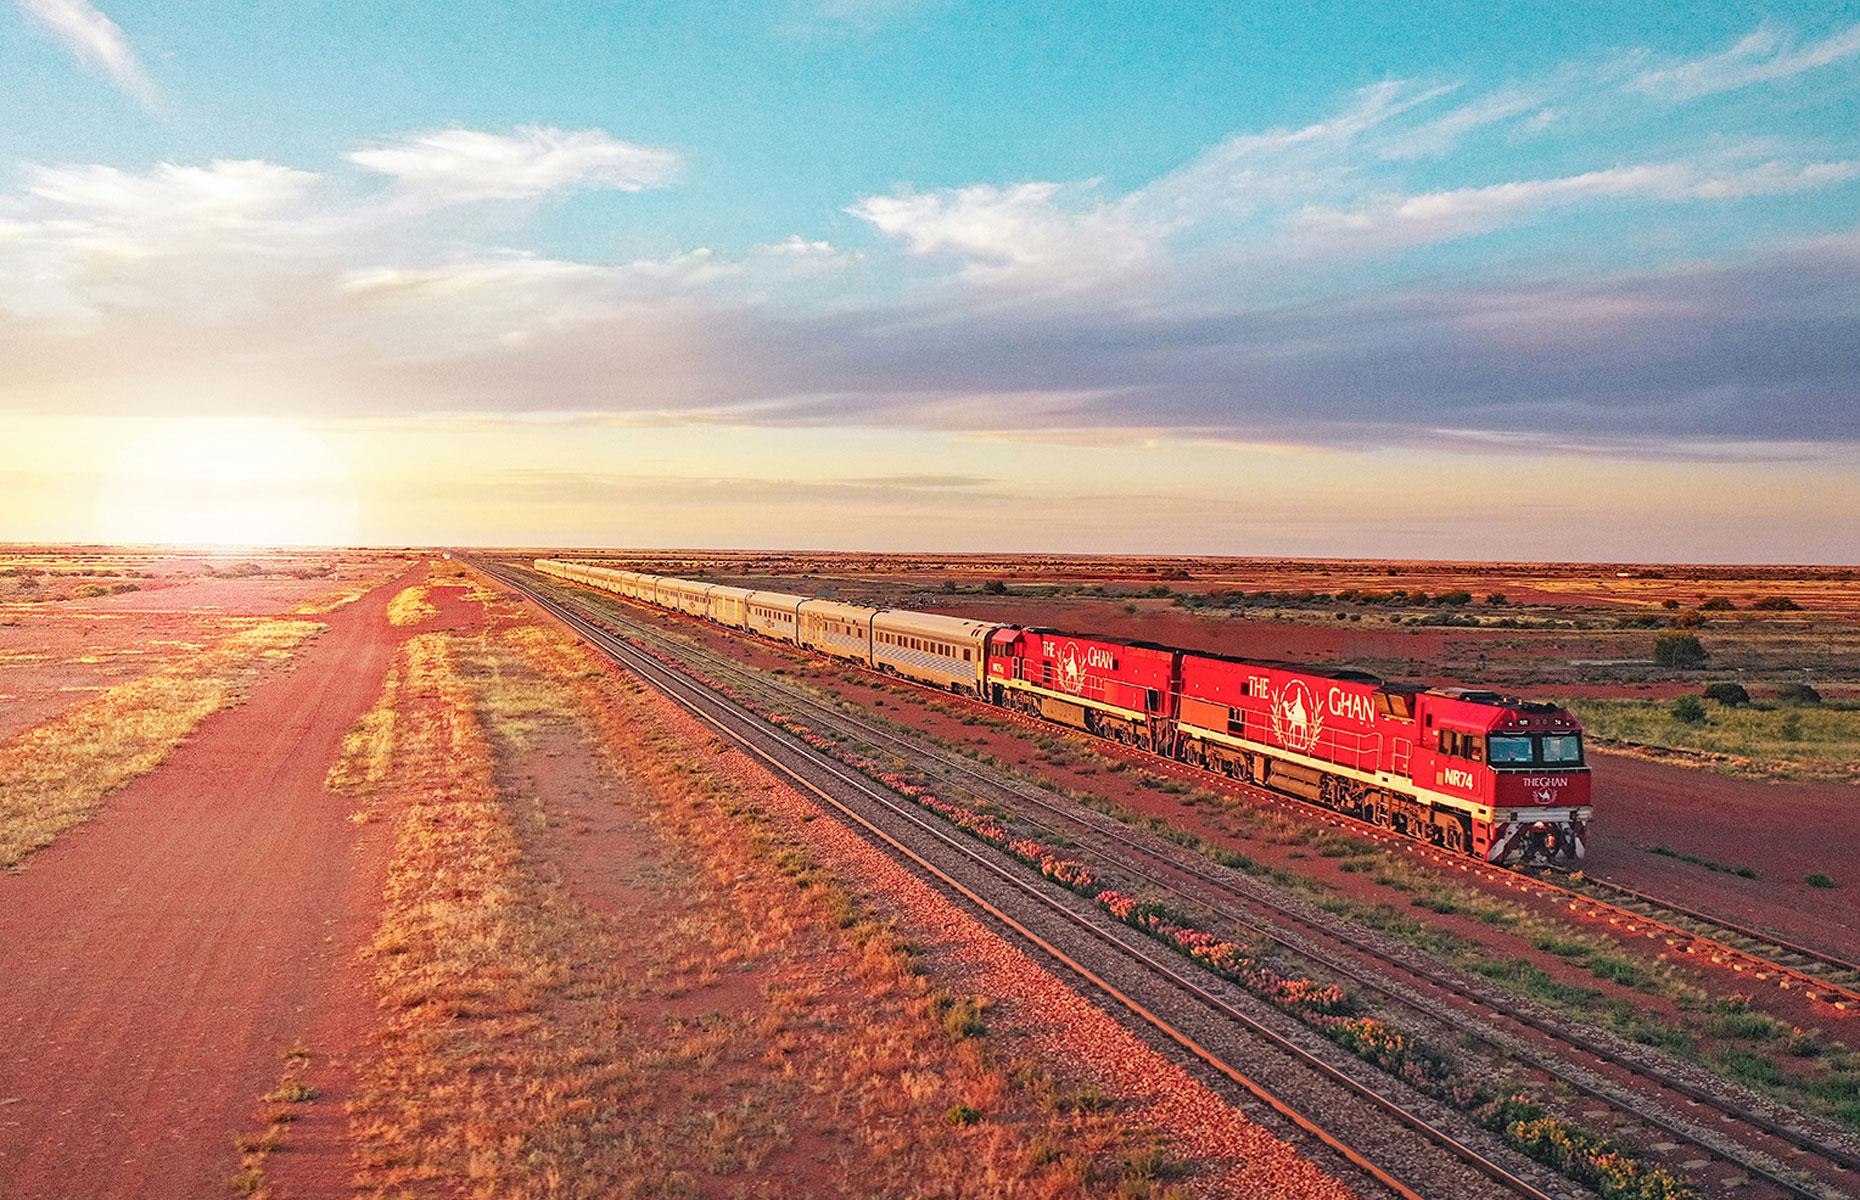 <p>Australia's swankiest rail experience started out in 1929 as <em>The Afghan Express</em>. Now considered one of the world's greatest train journeys, the renamed <em>The Ghan</em> trundles 1,851 miles (2,979km) through the Aussie outback on a route that takes it from Adelaide to Darwin via Alice Springs.</p>  <p>The epic Ghan Expedition package, which stretches over four days and three nights, is only matched by its epic fare prices. The most expensive option, the Platinum Service, comes in at $5,280 (£4,155), which works out at $1,760 (£1,385) per person per night.</p>